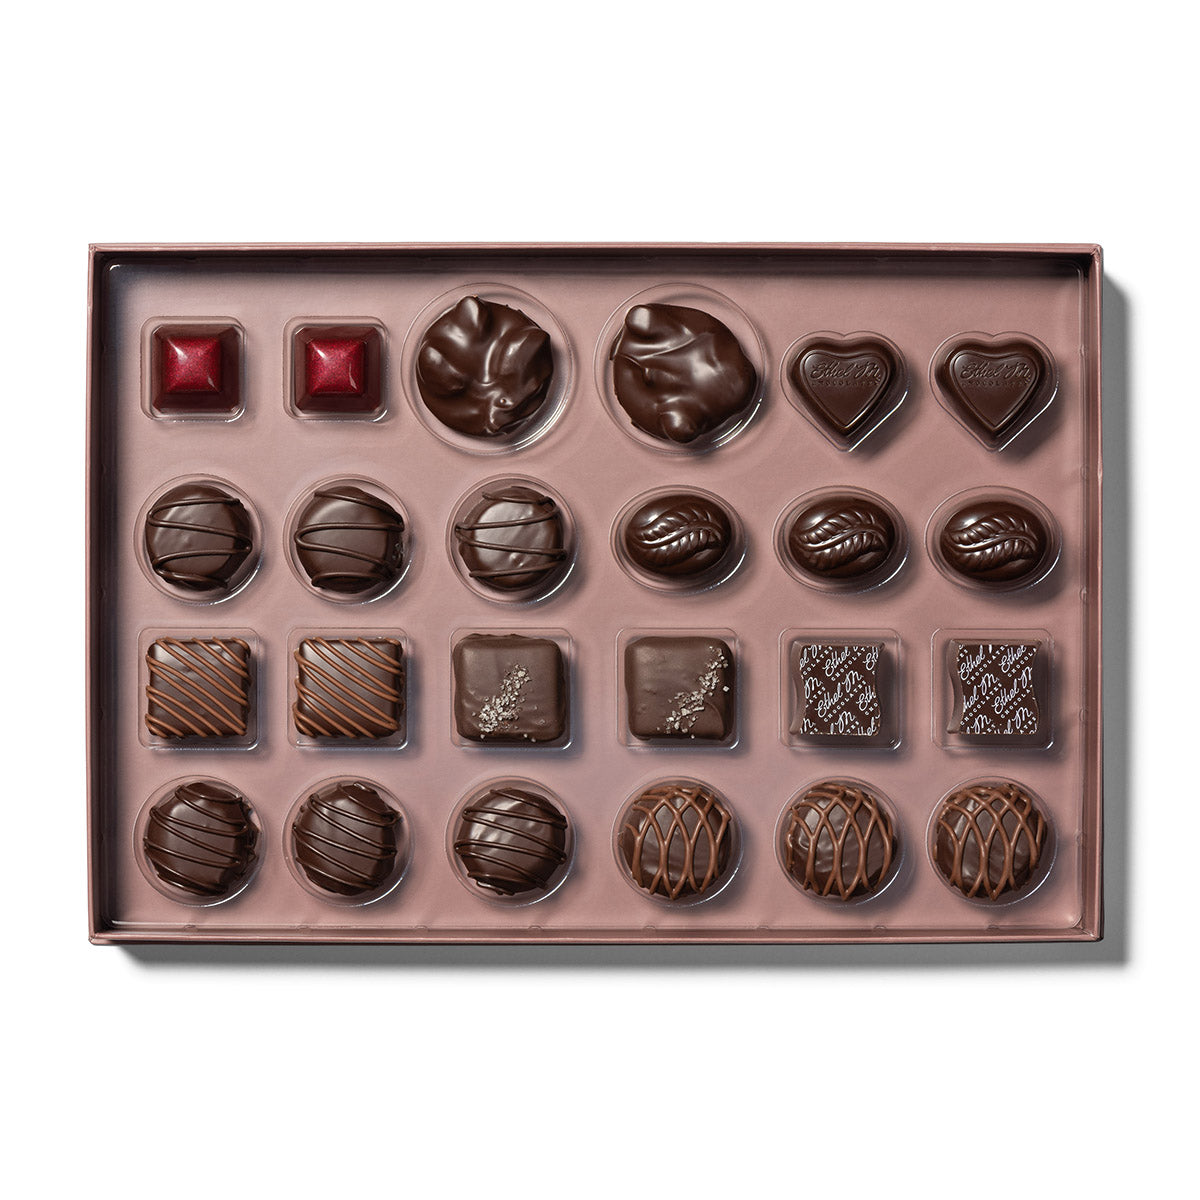 Delight on this 24 Piece Ethel M Chocolates Ultimate Assortment of the Finest Dark Chocolate coverings and Gourmet Fillings.